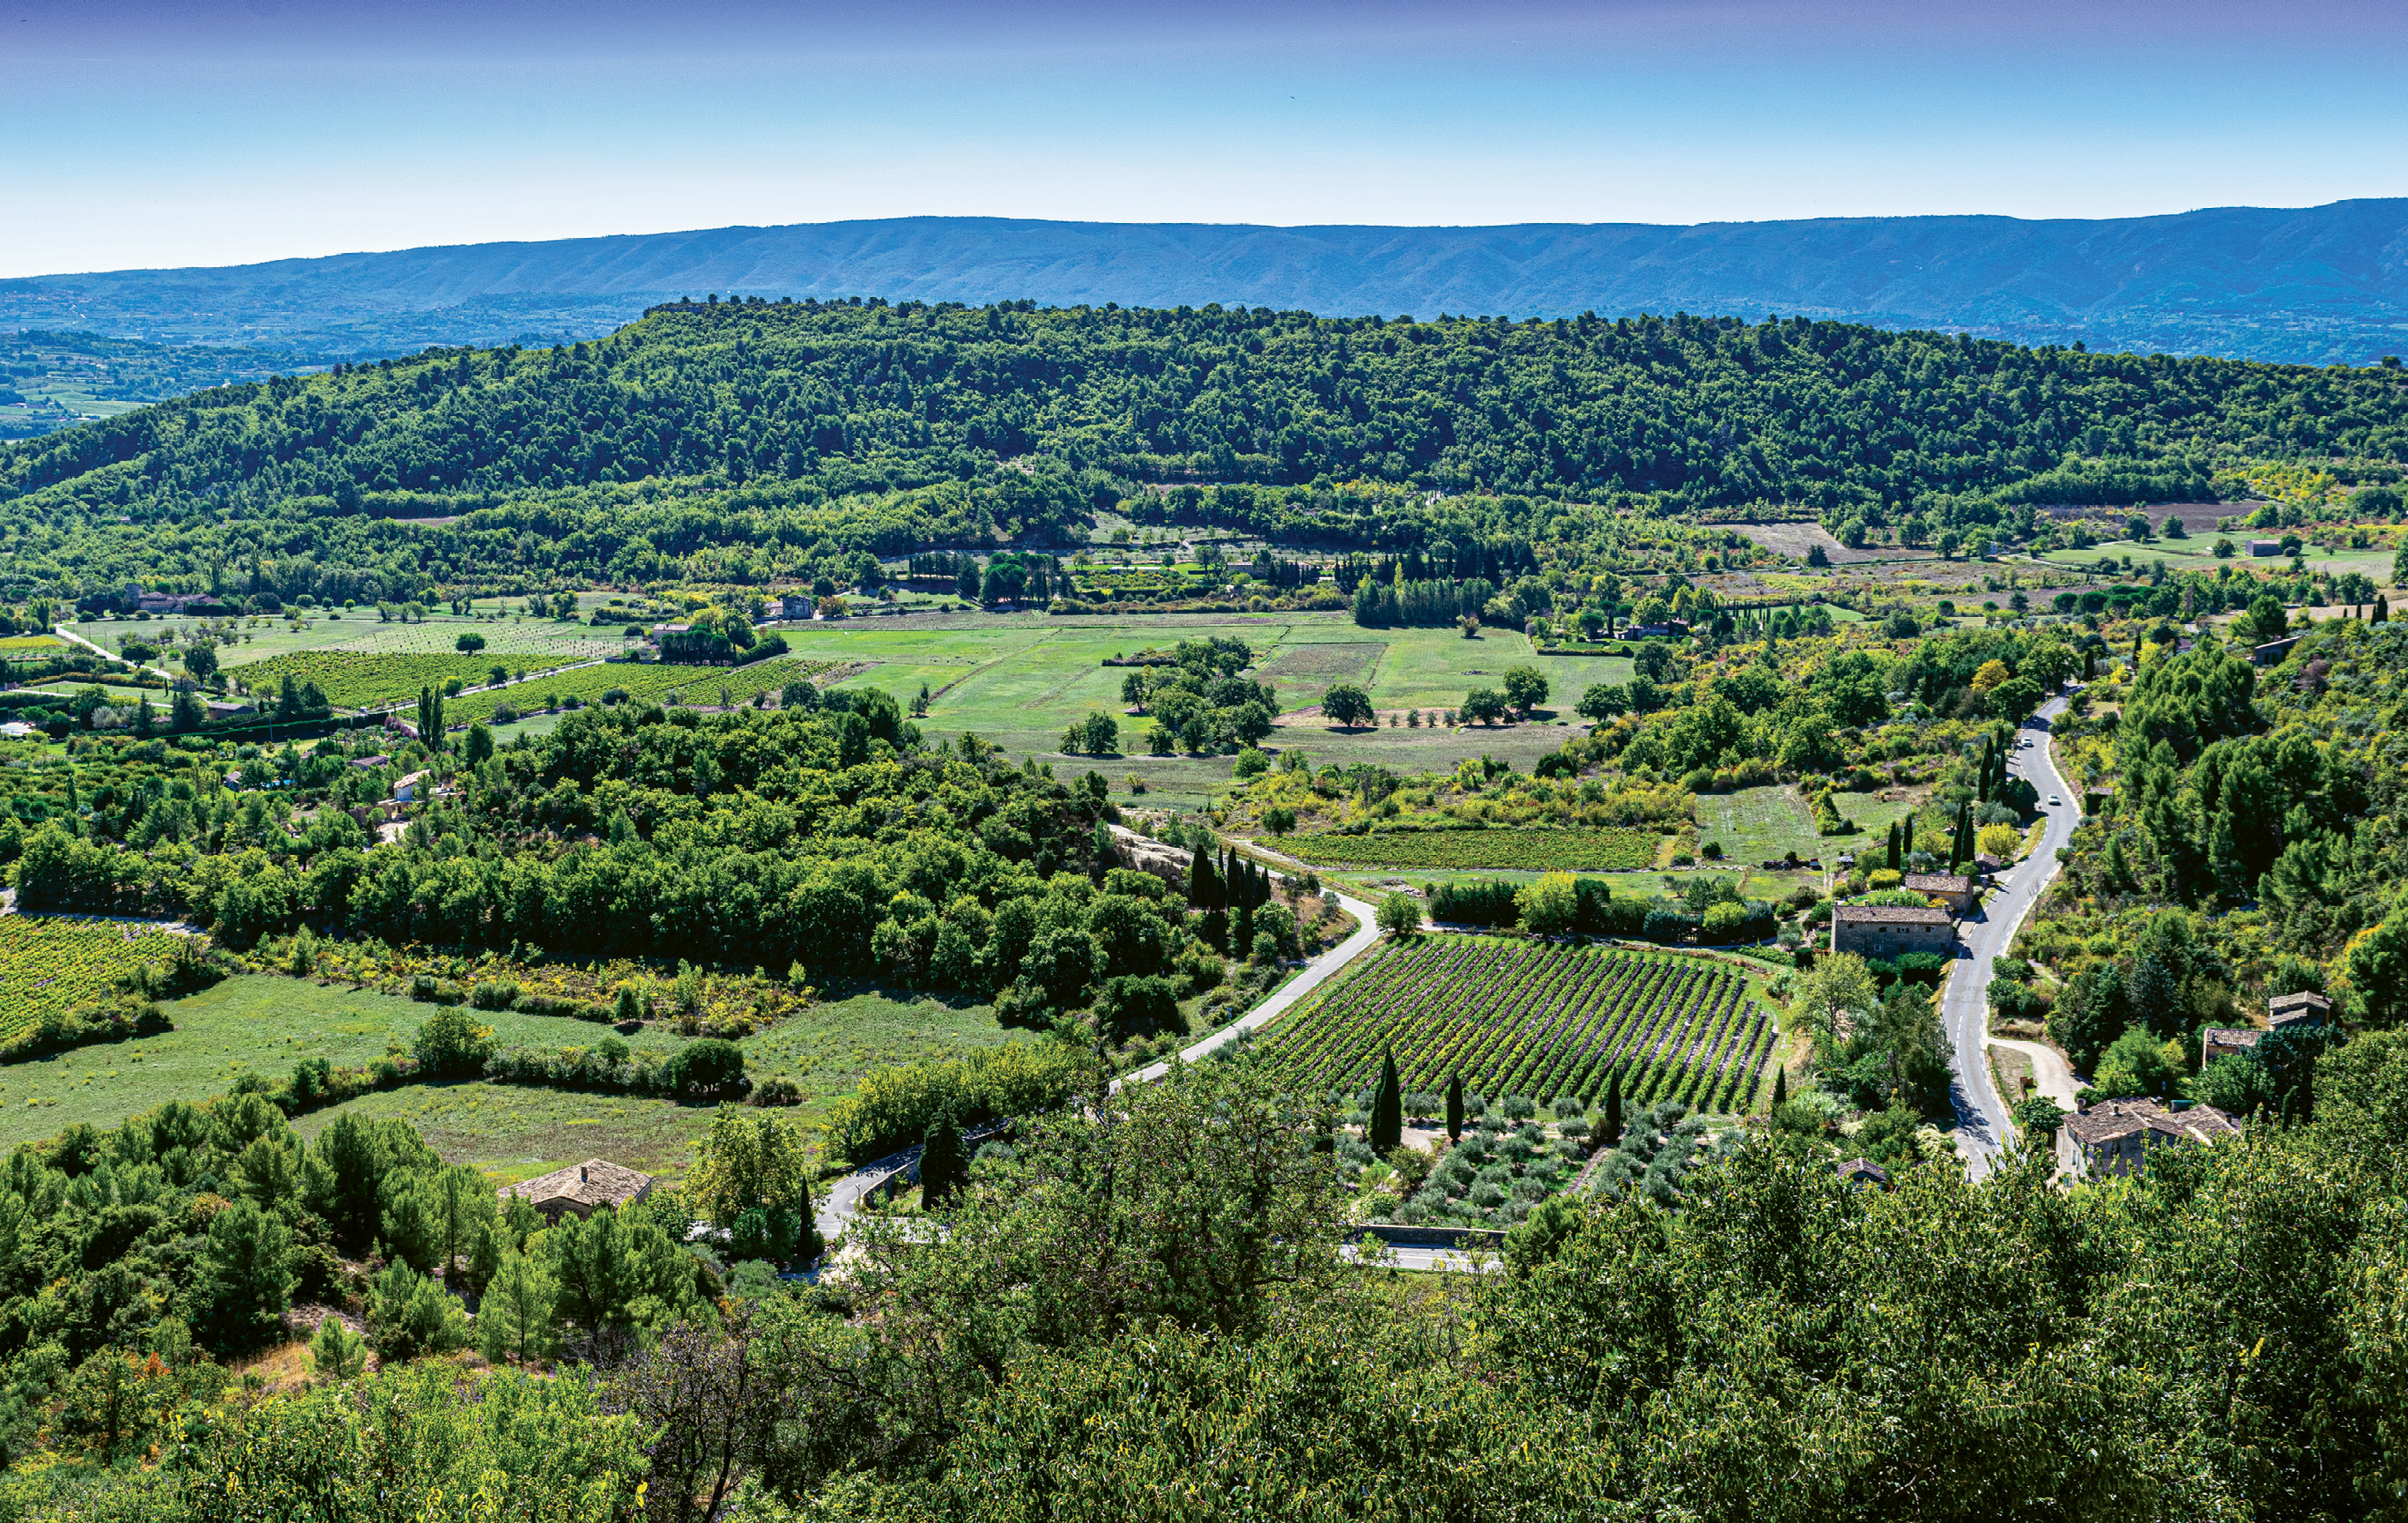 Vineyards, olive groves, and cypress trees were as far as the eye could see in the Luberon.